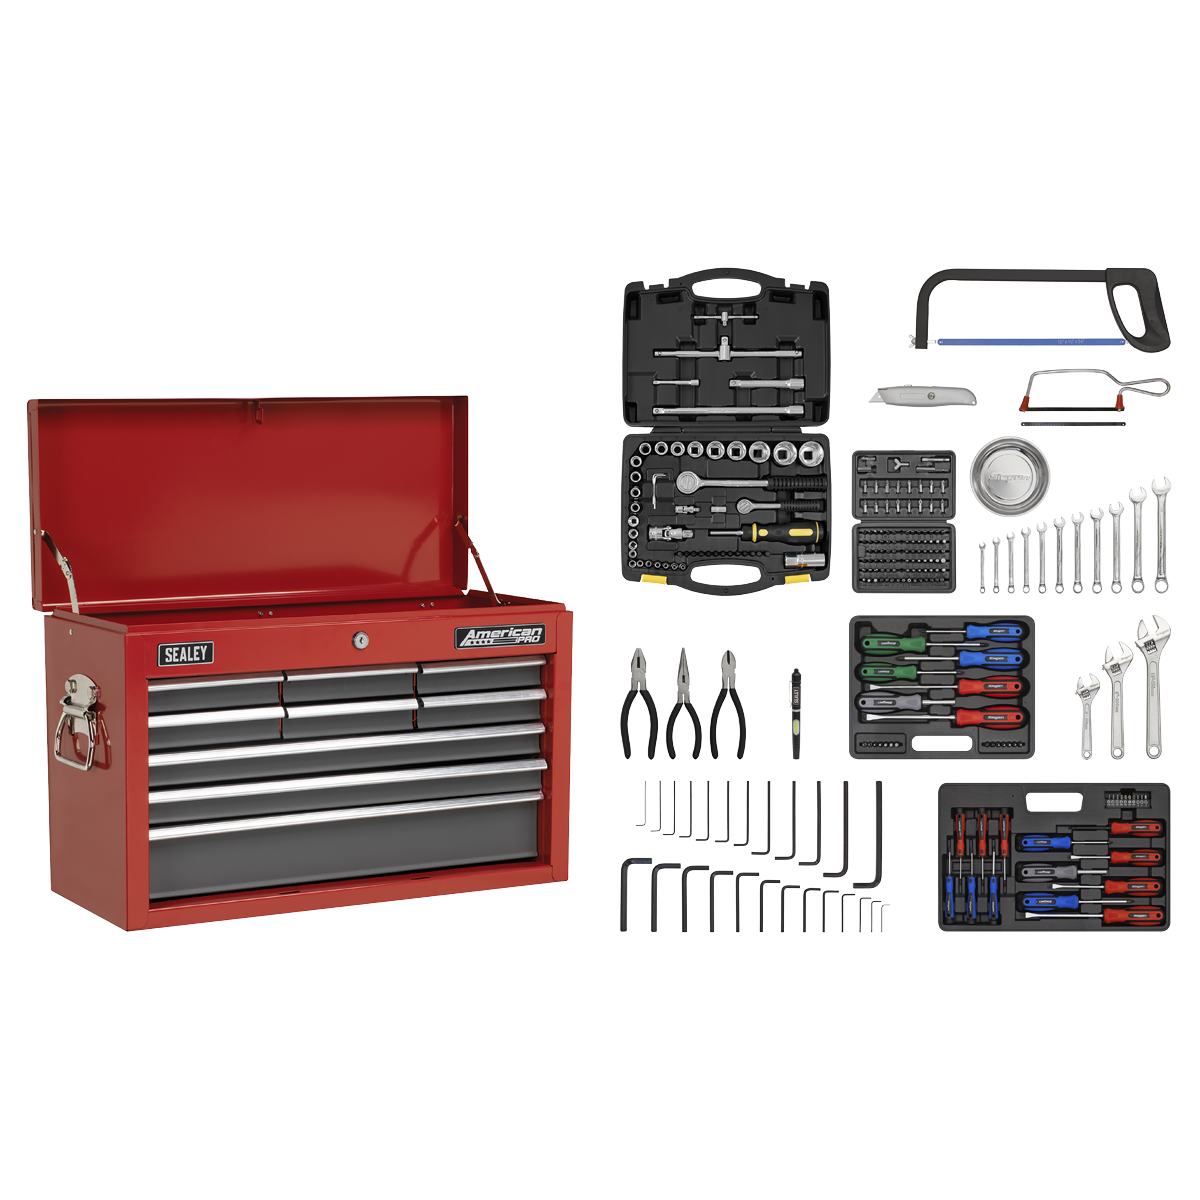 Topchest 9 Drawer with Ball-Bearing Slides - Red/Grey & 205pc Tool Kit - AP22509BBCOMB - Farming Parts